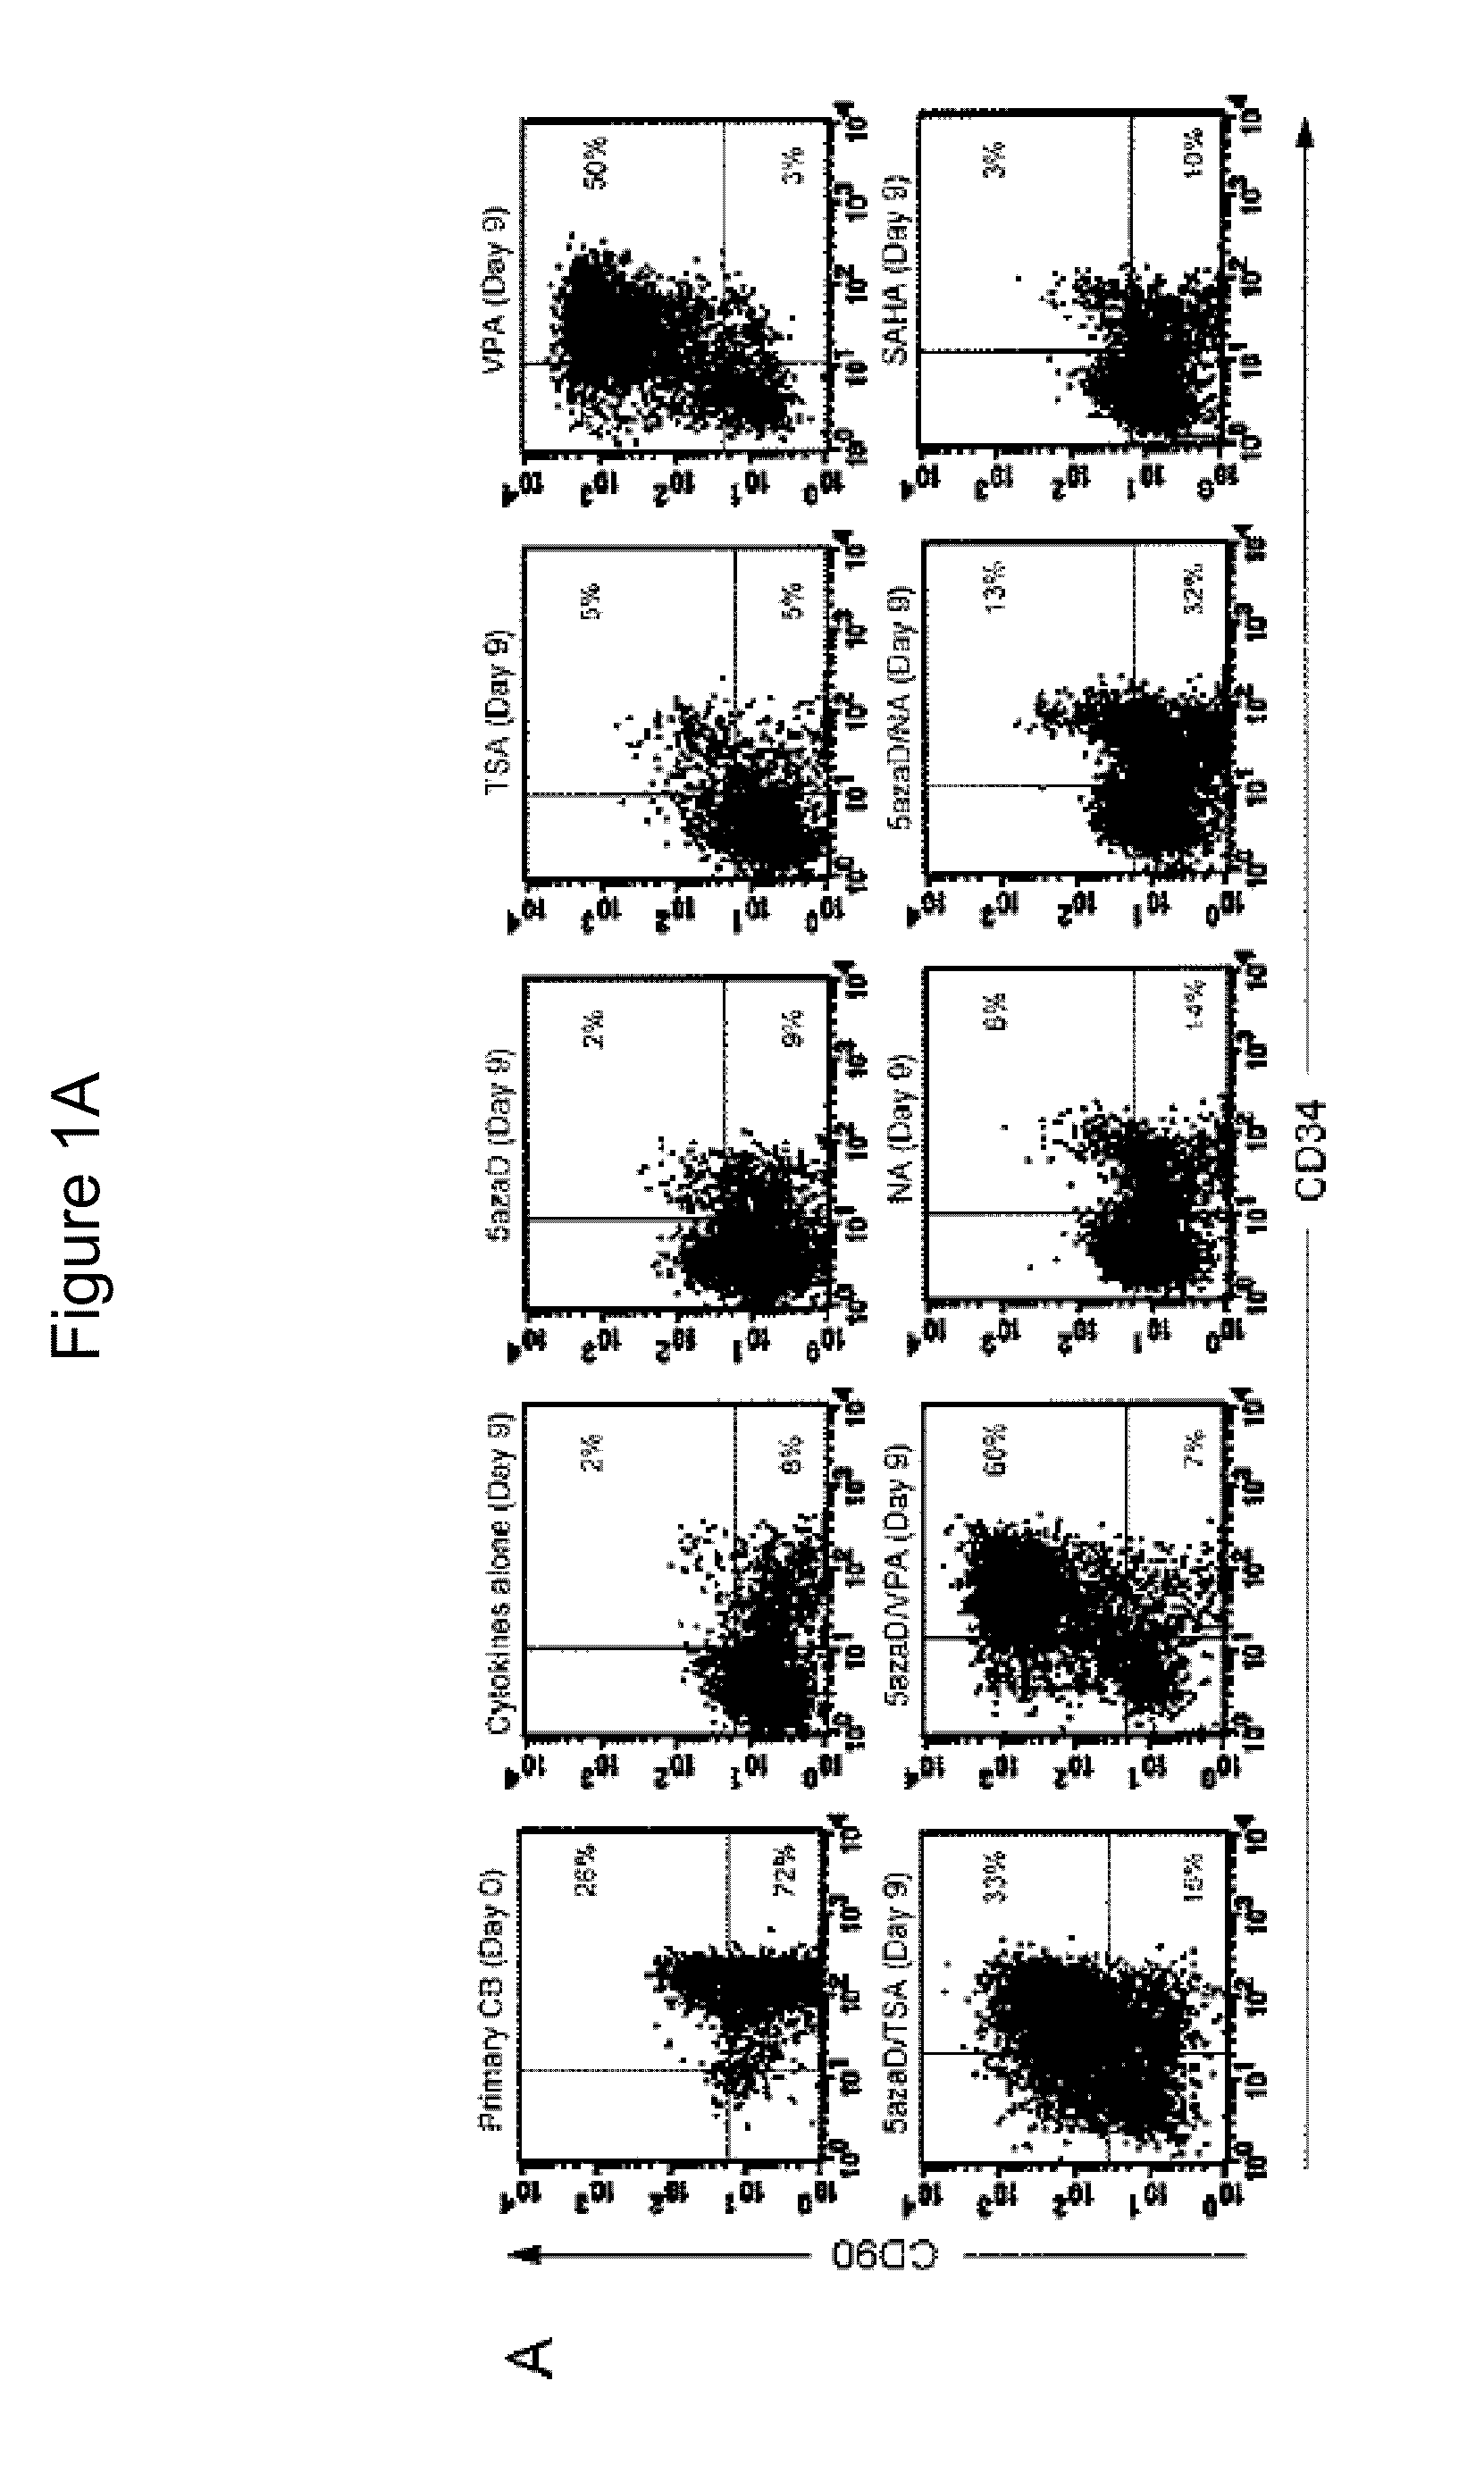 Methods of Ex Vivo Expansion of Blood Progenitor Cells, and Generation of Composite Grafts